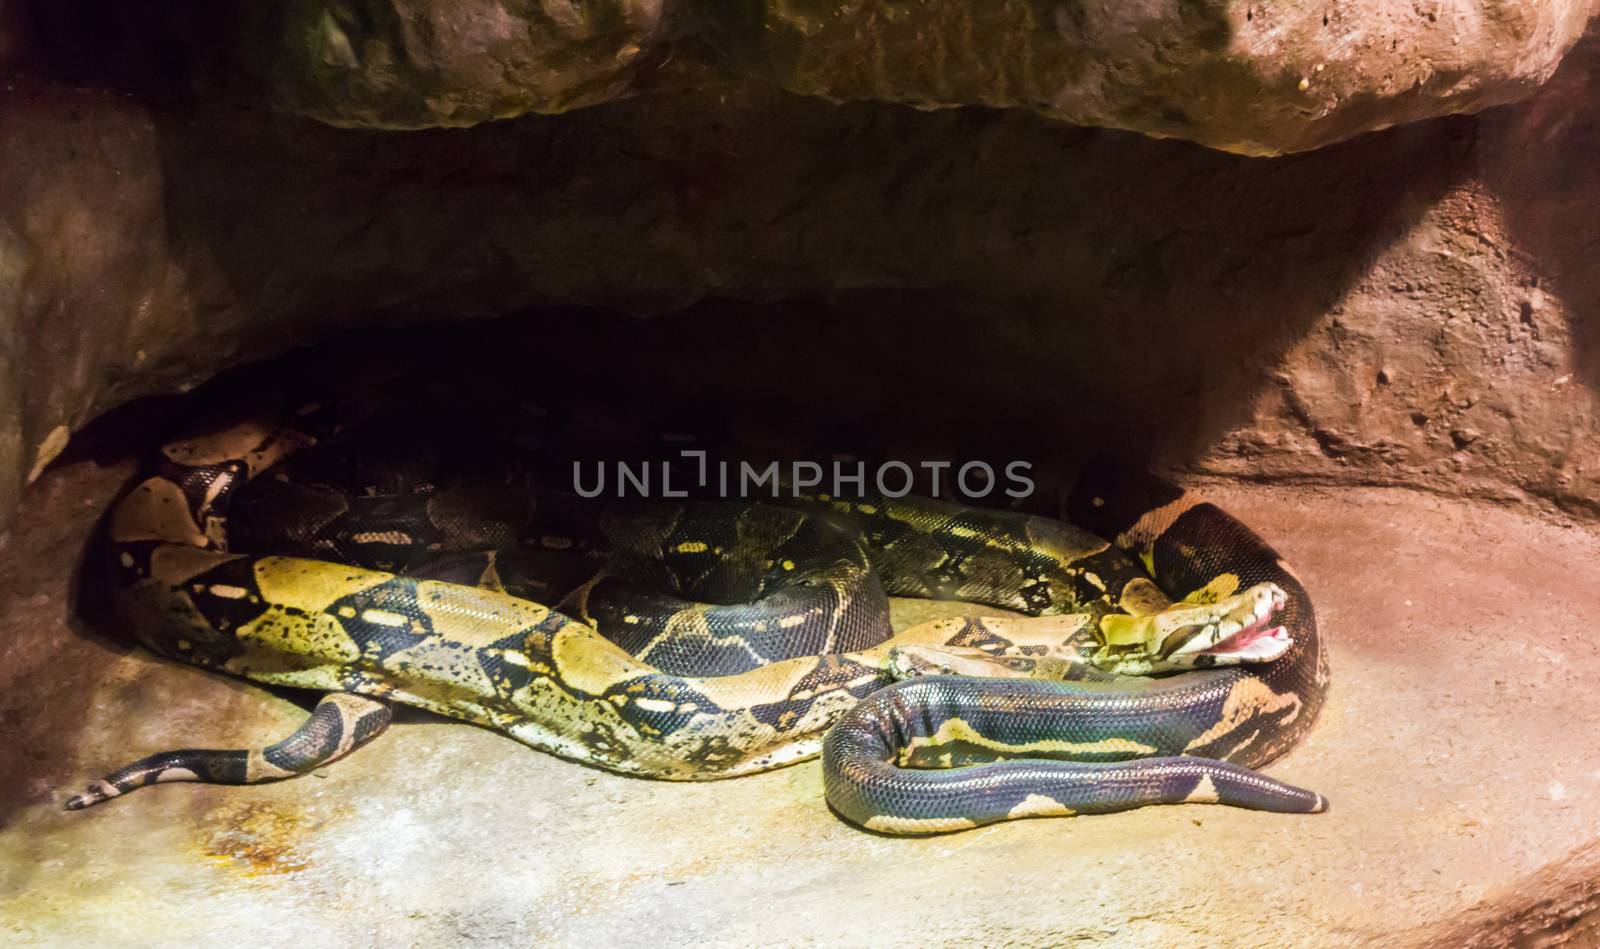 two boa constrictor snakes together under a rock one with open mouth